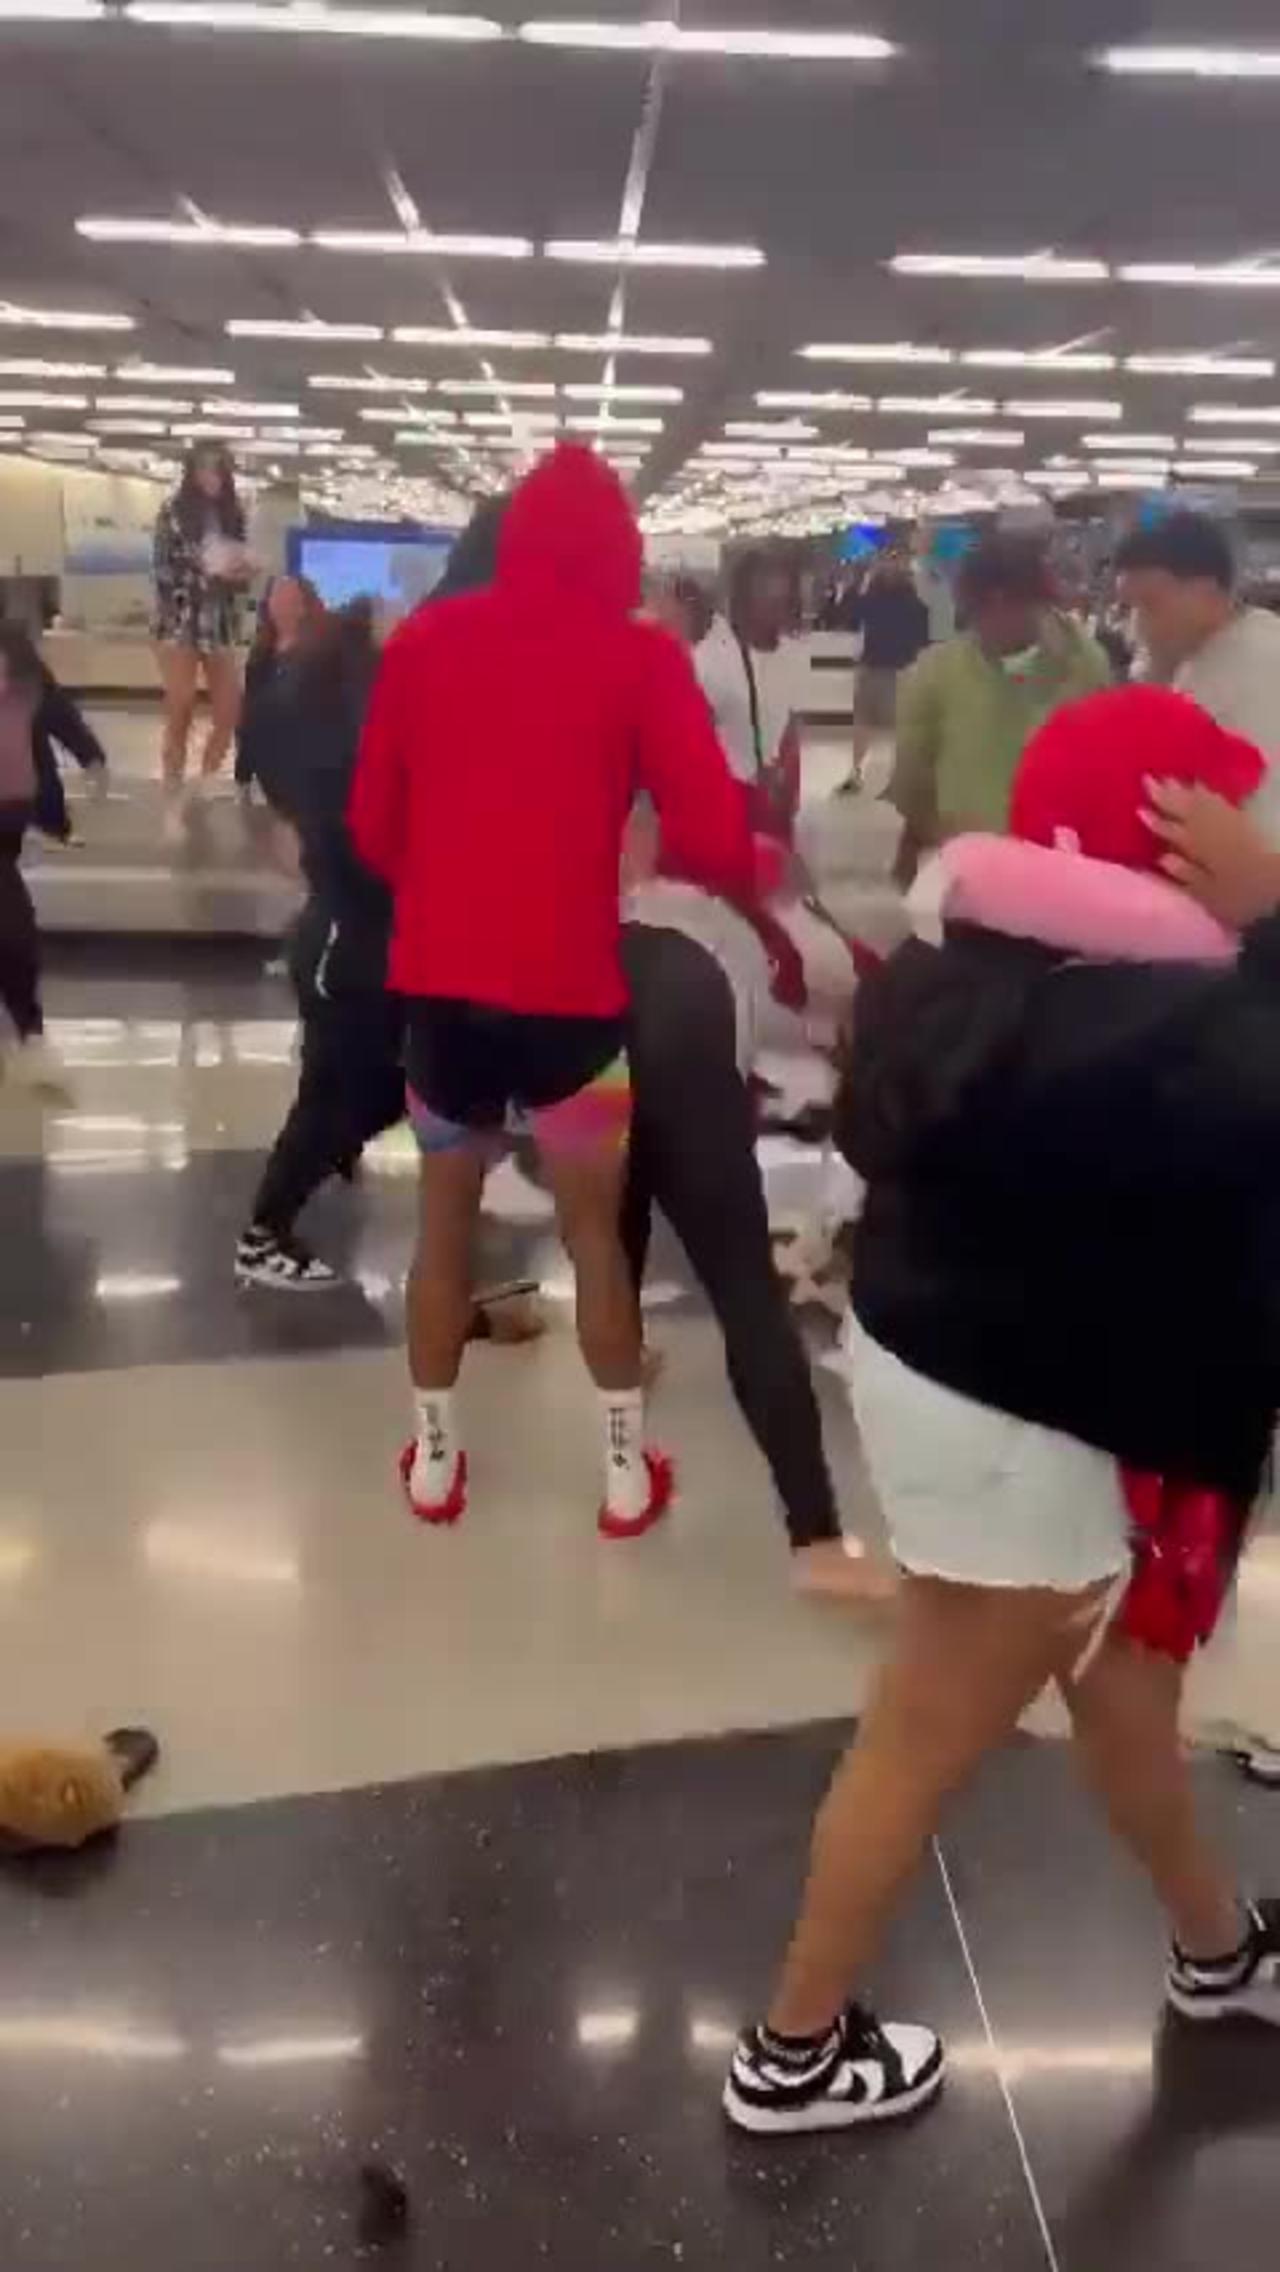 Video captures wild brawl at Chicago’s O’Hare airport, leading to 2 arrests